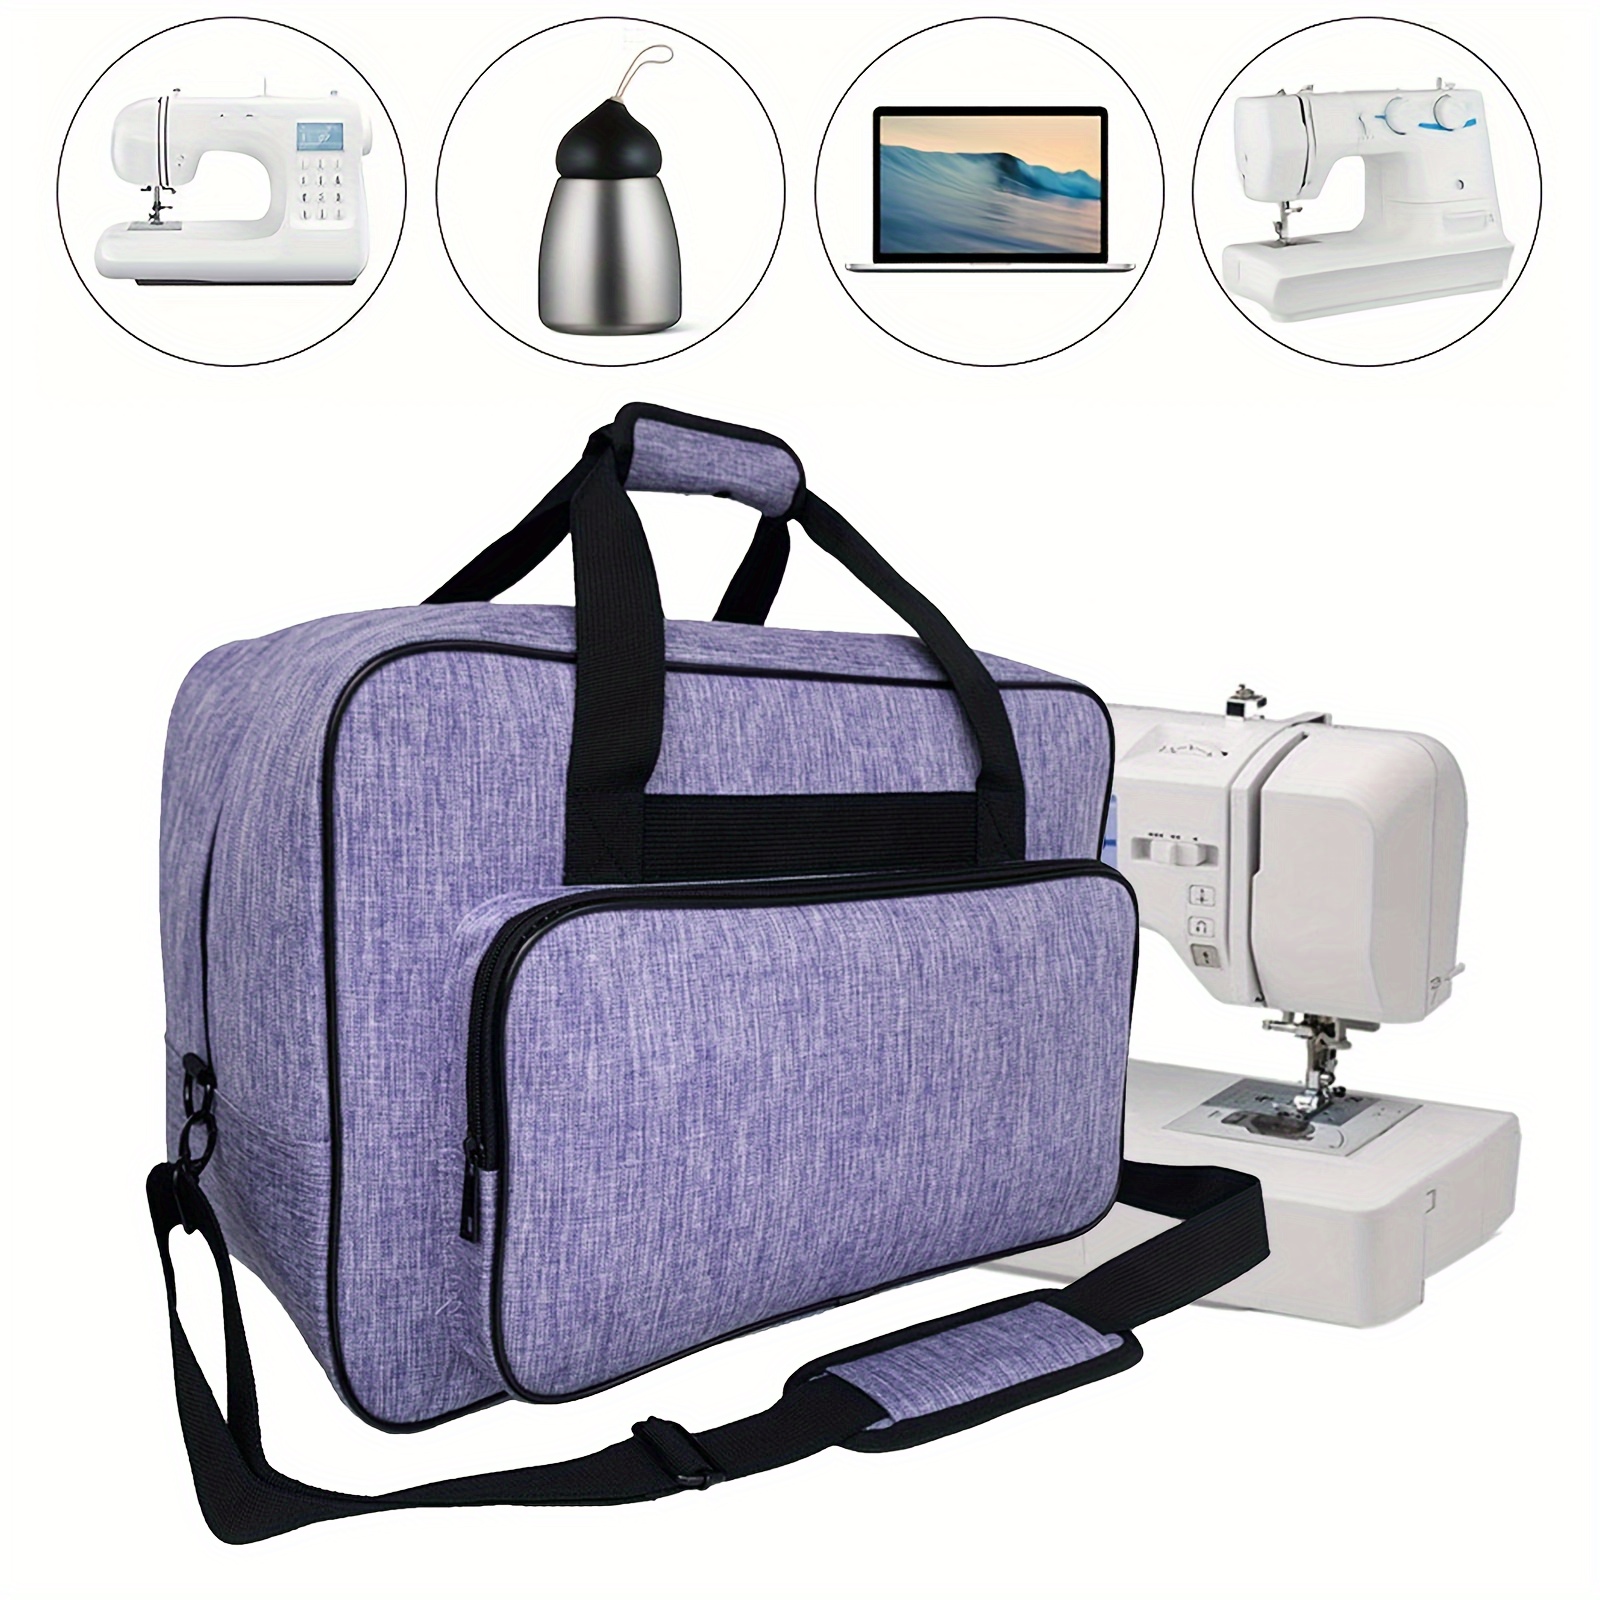 

1pc Sewing Machine Carrying Case, Universal Tote Travel Bag, Compatible With Most Standard Machines, Portable Padded Storage Dust Cover With Pockets, For Sewing Machine & Sewing Accessories